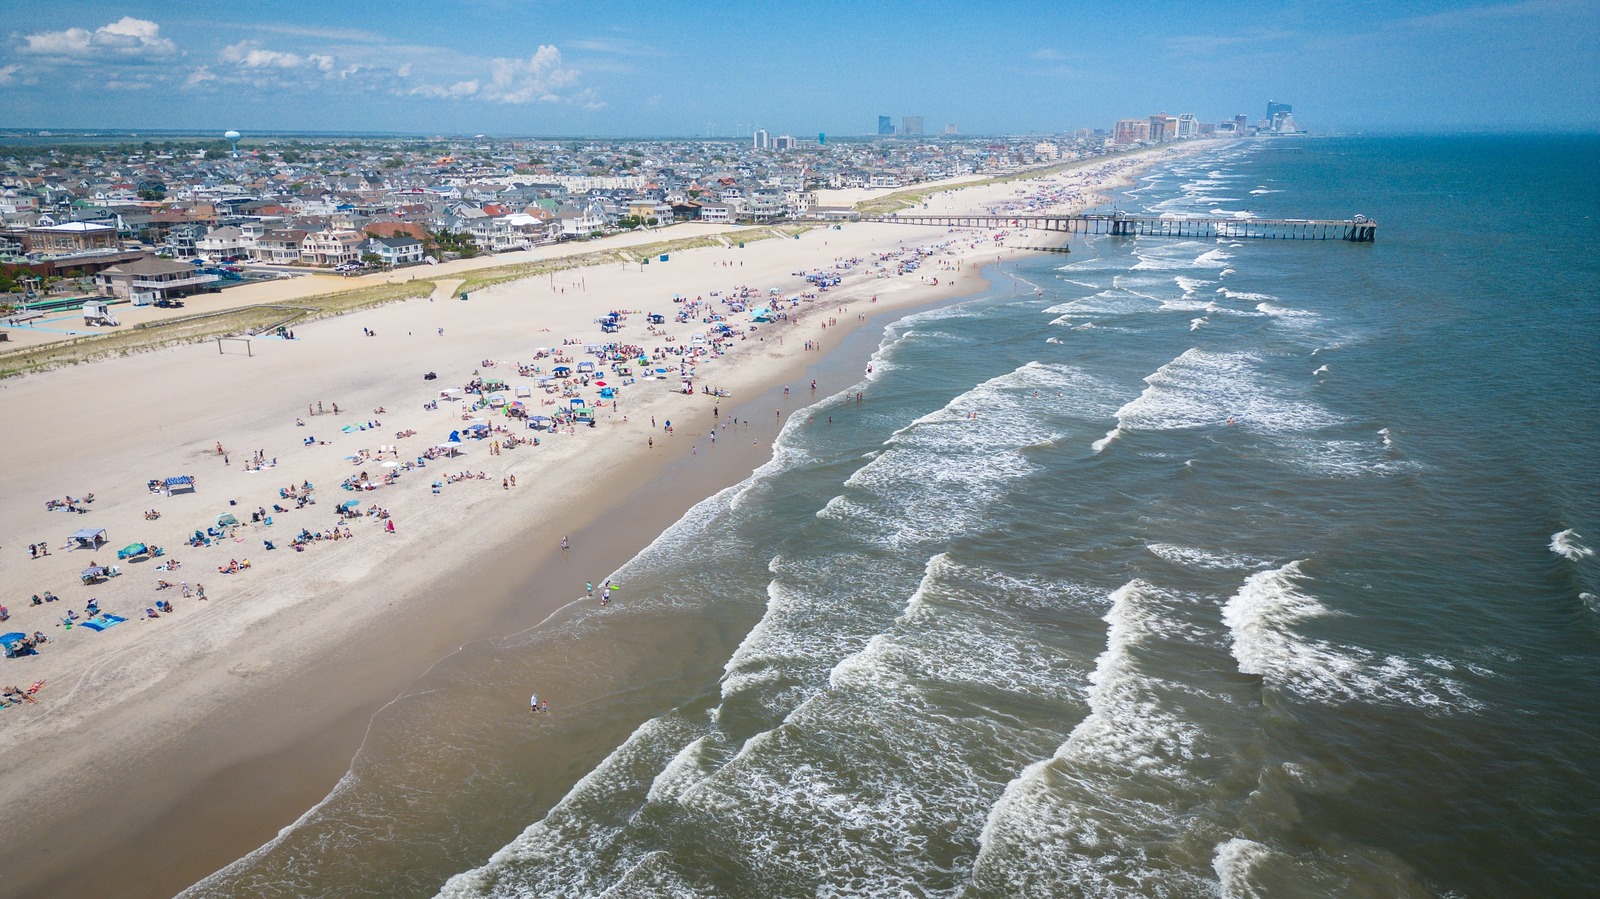 The Ultimate Jersey Shore Beach Guide